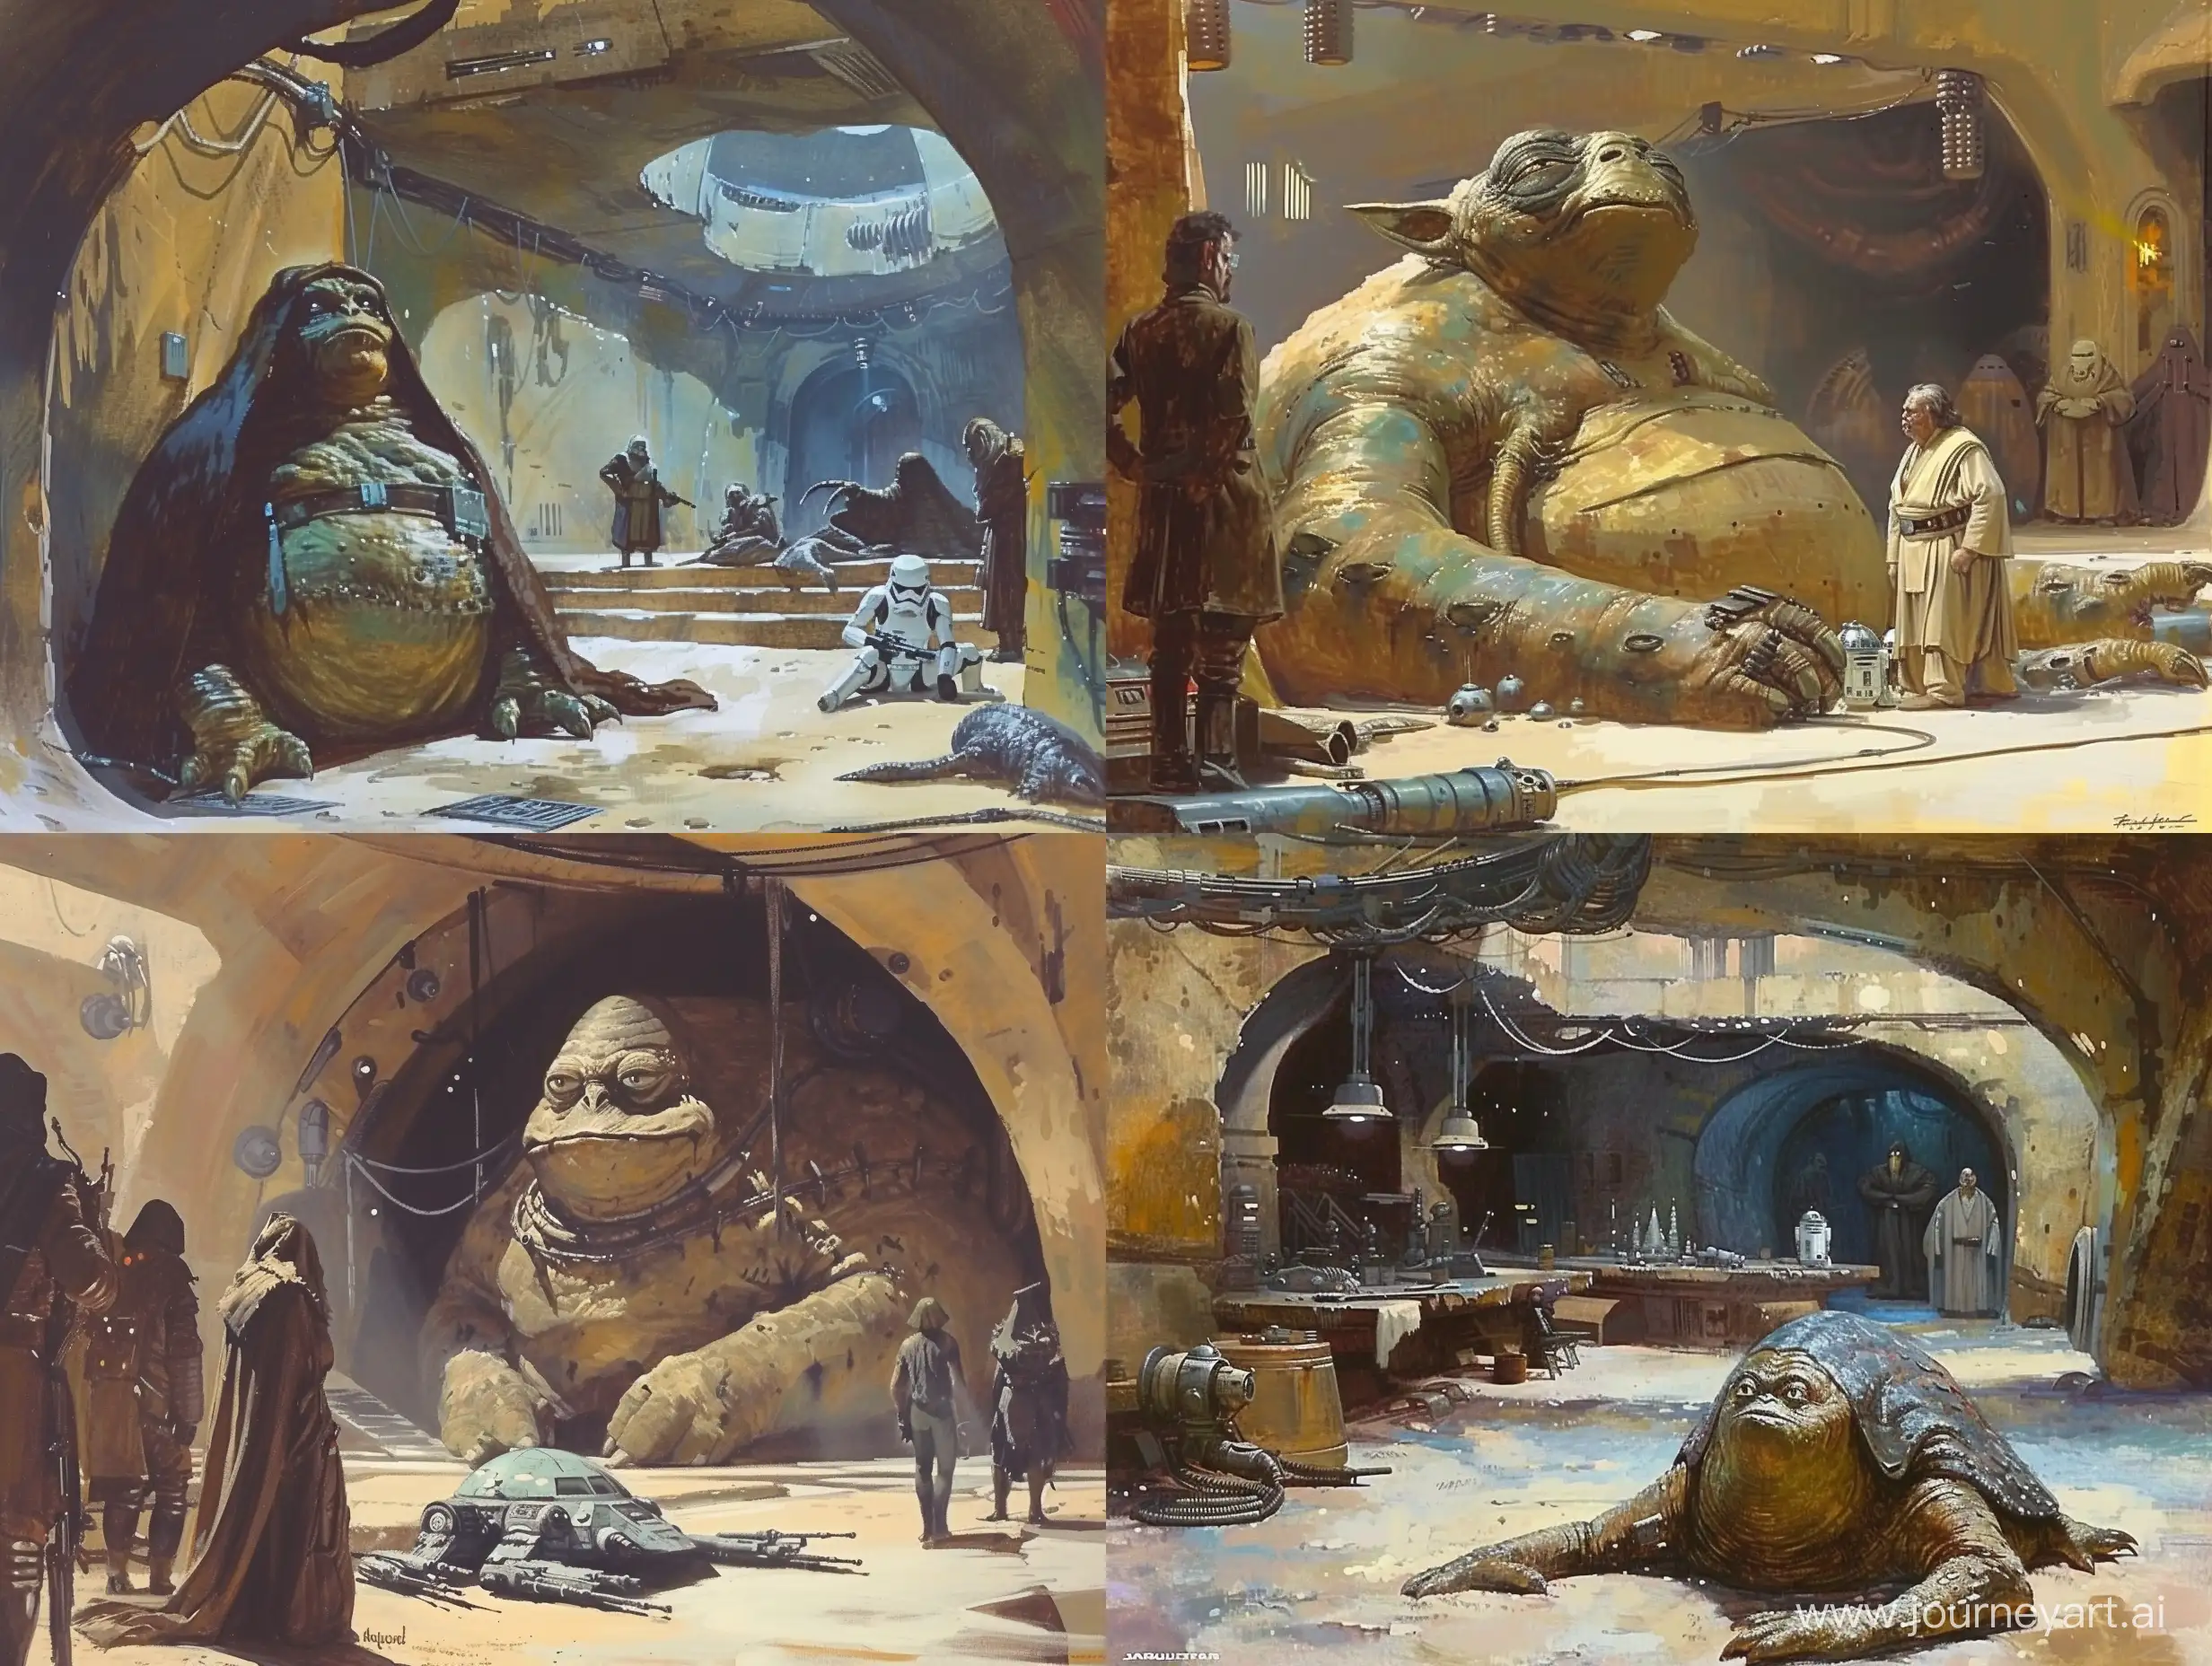 Classic star wars concept art of a scene in Jabba's palace painted by Ralph McQuarrie. 80s sci fi concept art. in color. 